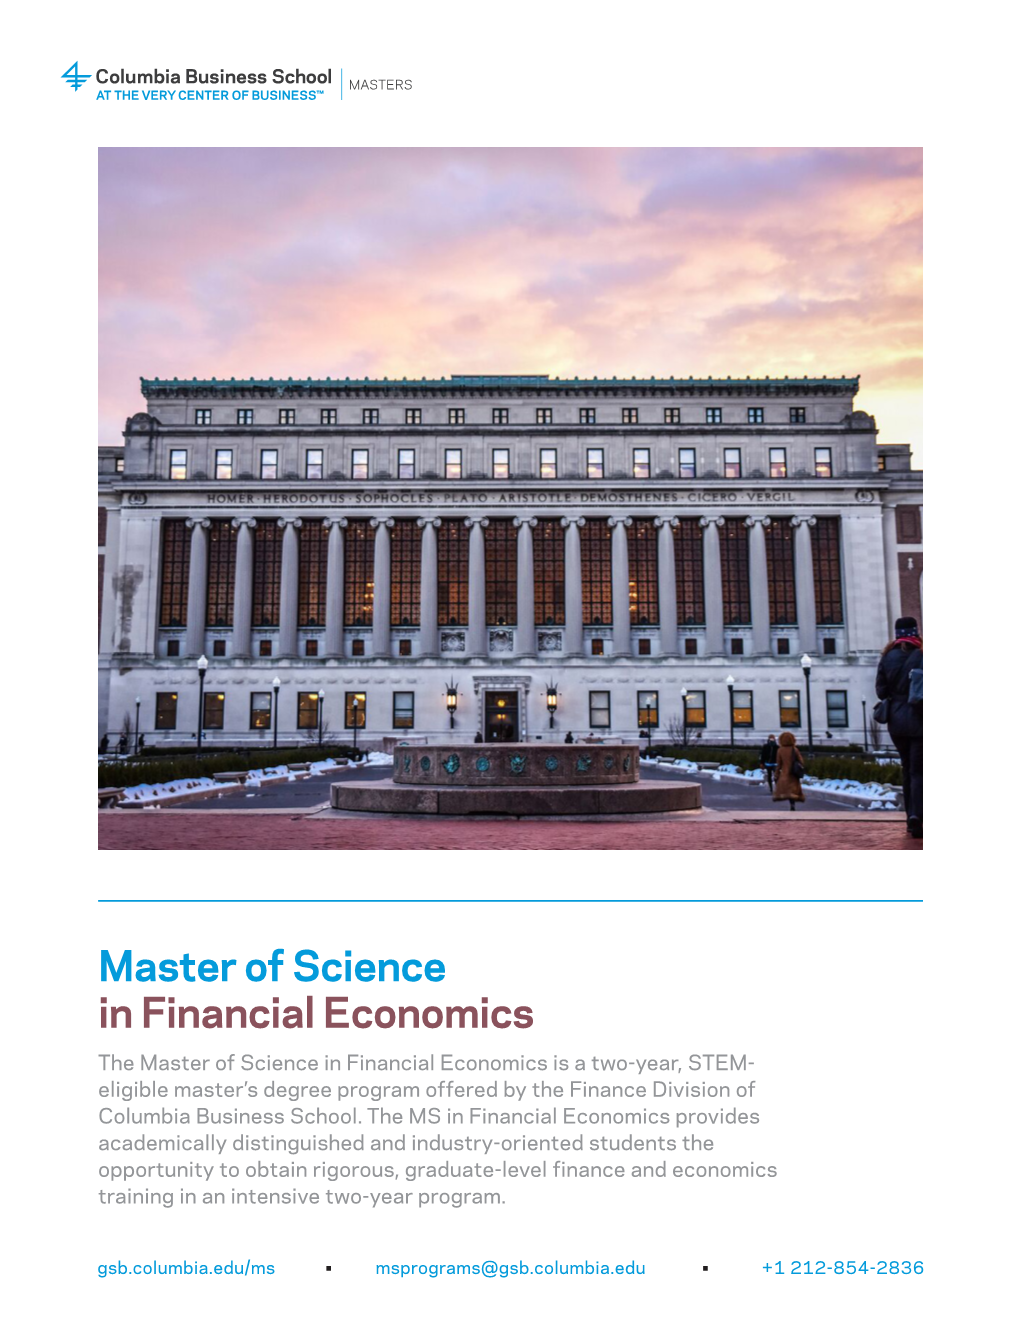 Master of Science in Financial Economics